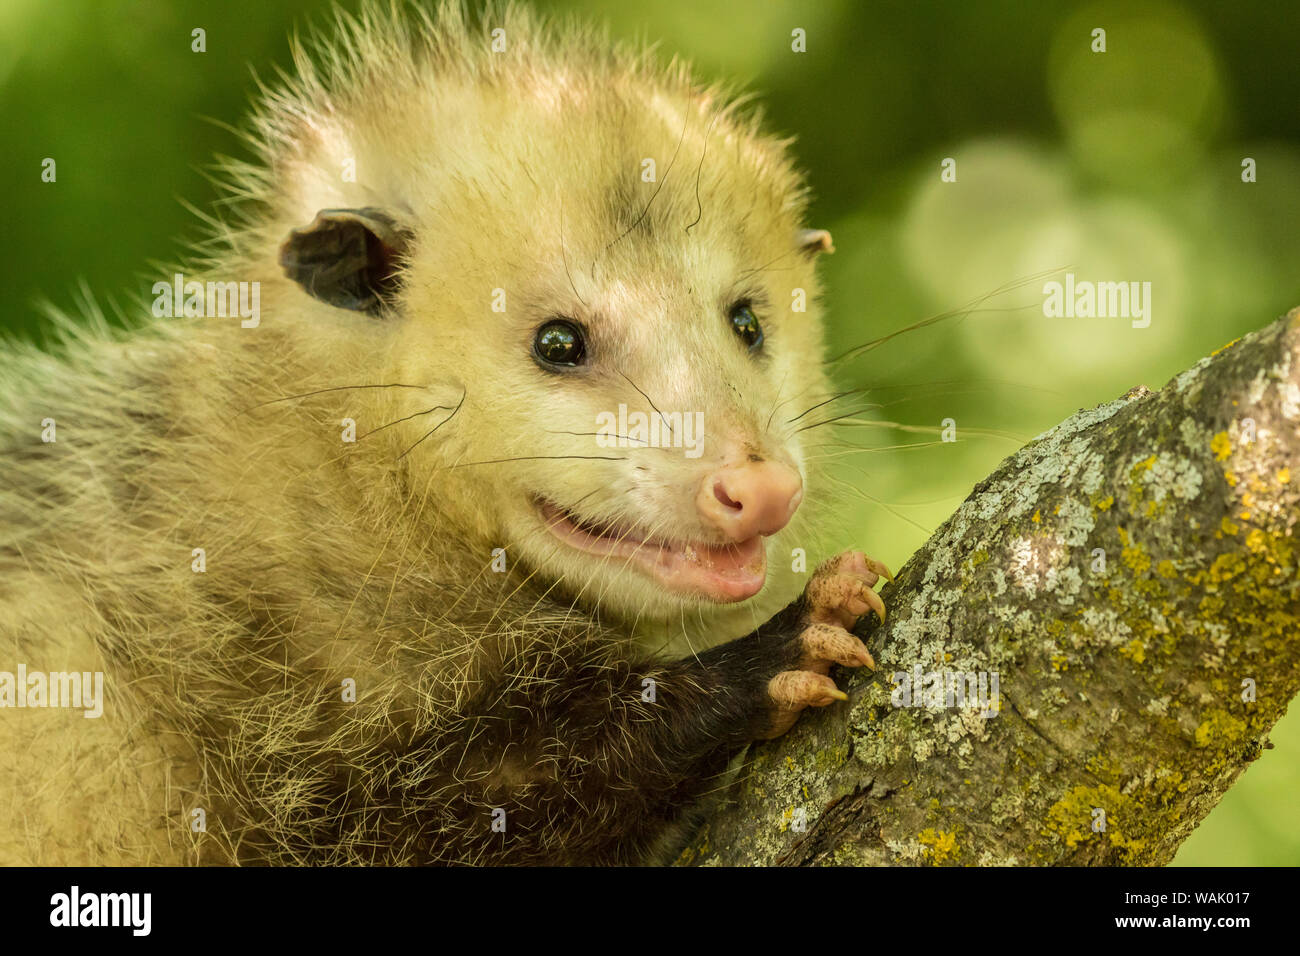 Pine County. Captive adult opossum. Credit as: Cathy and Gordon Illg / Jaynes Gallery / DanitaDelimont.com Stock Photo